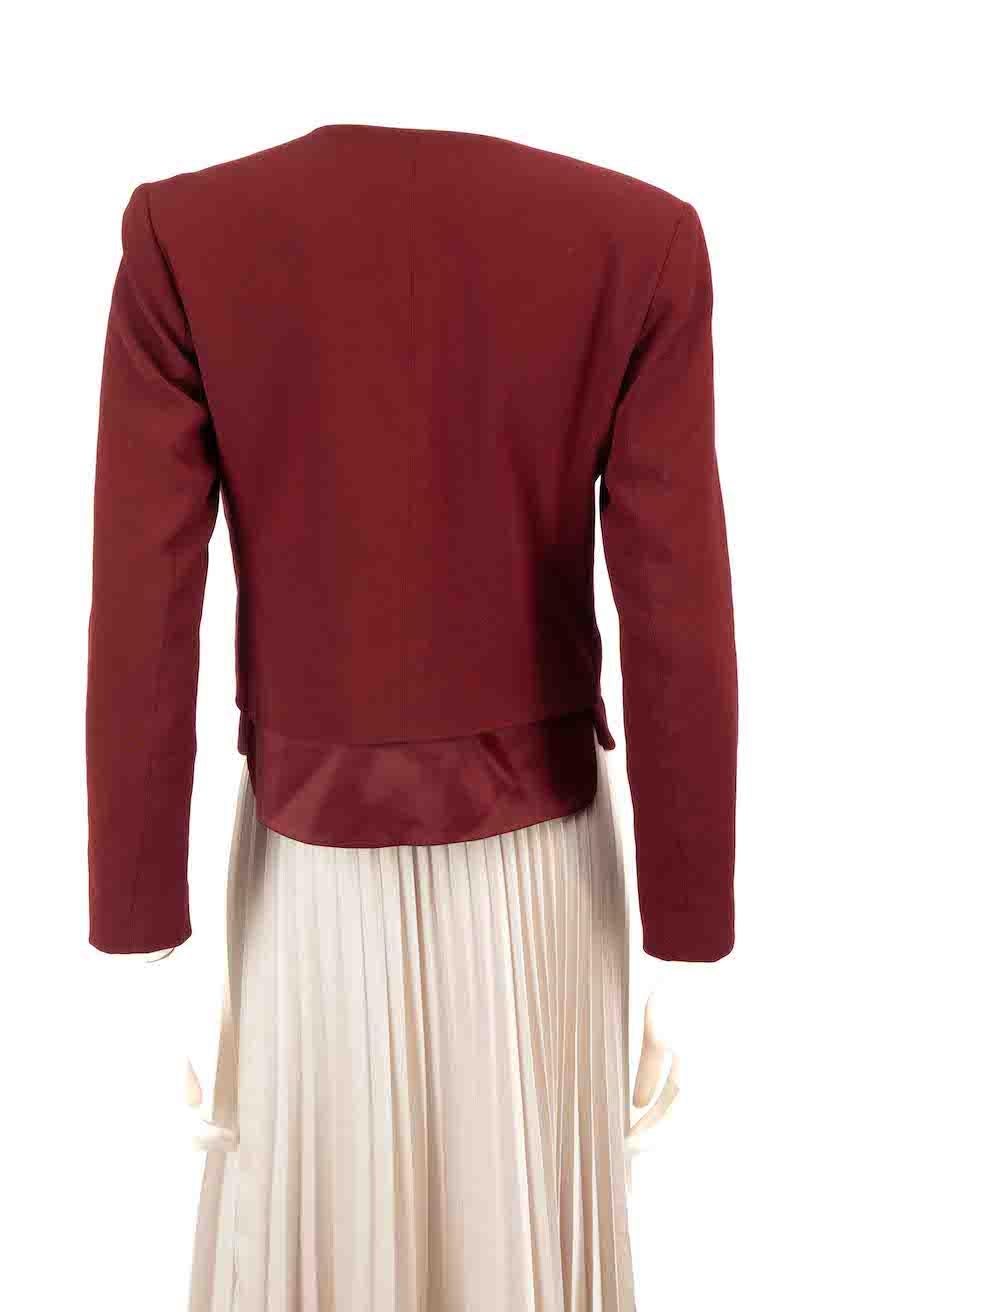 Sandro Burgundy Zip Pocket Crop Jacket Size S In Excellent Condition For Sale In London, GB